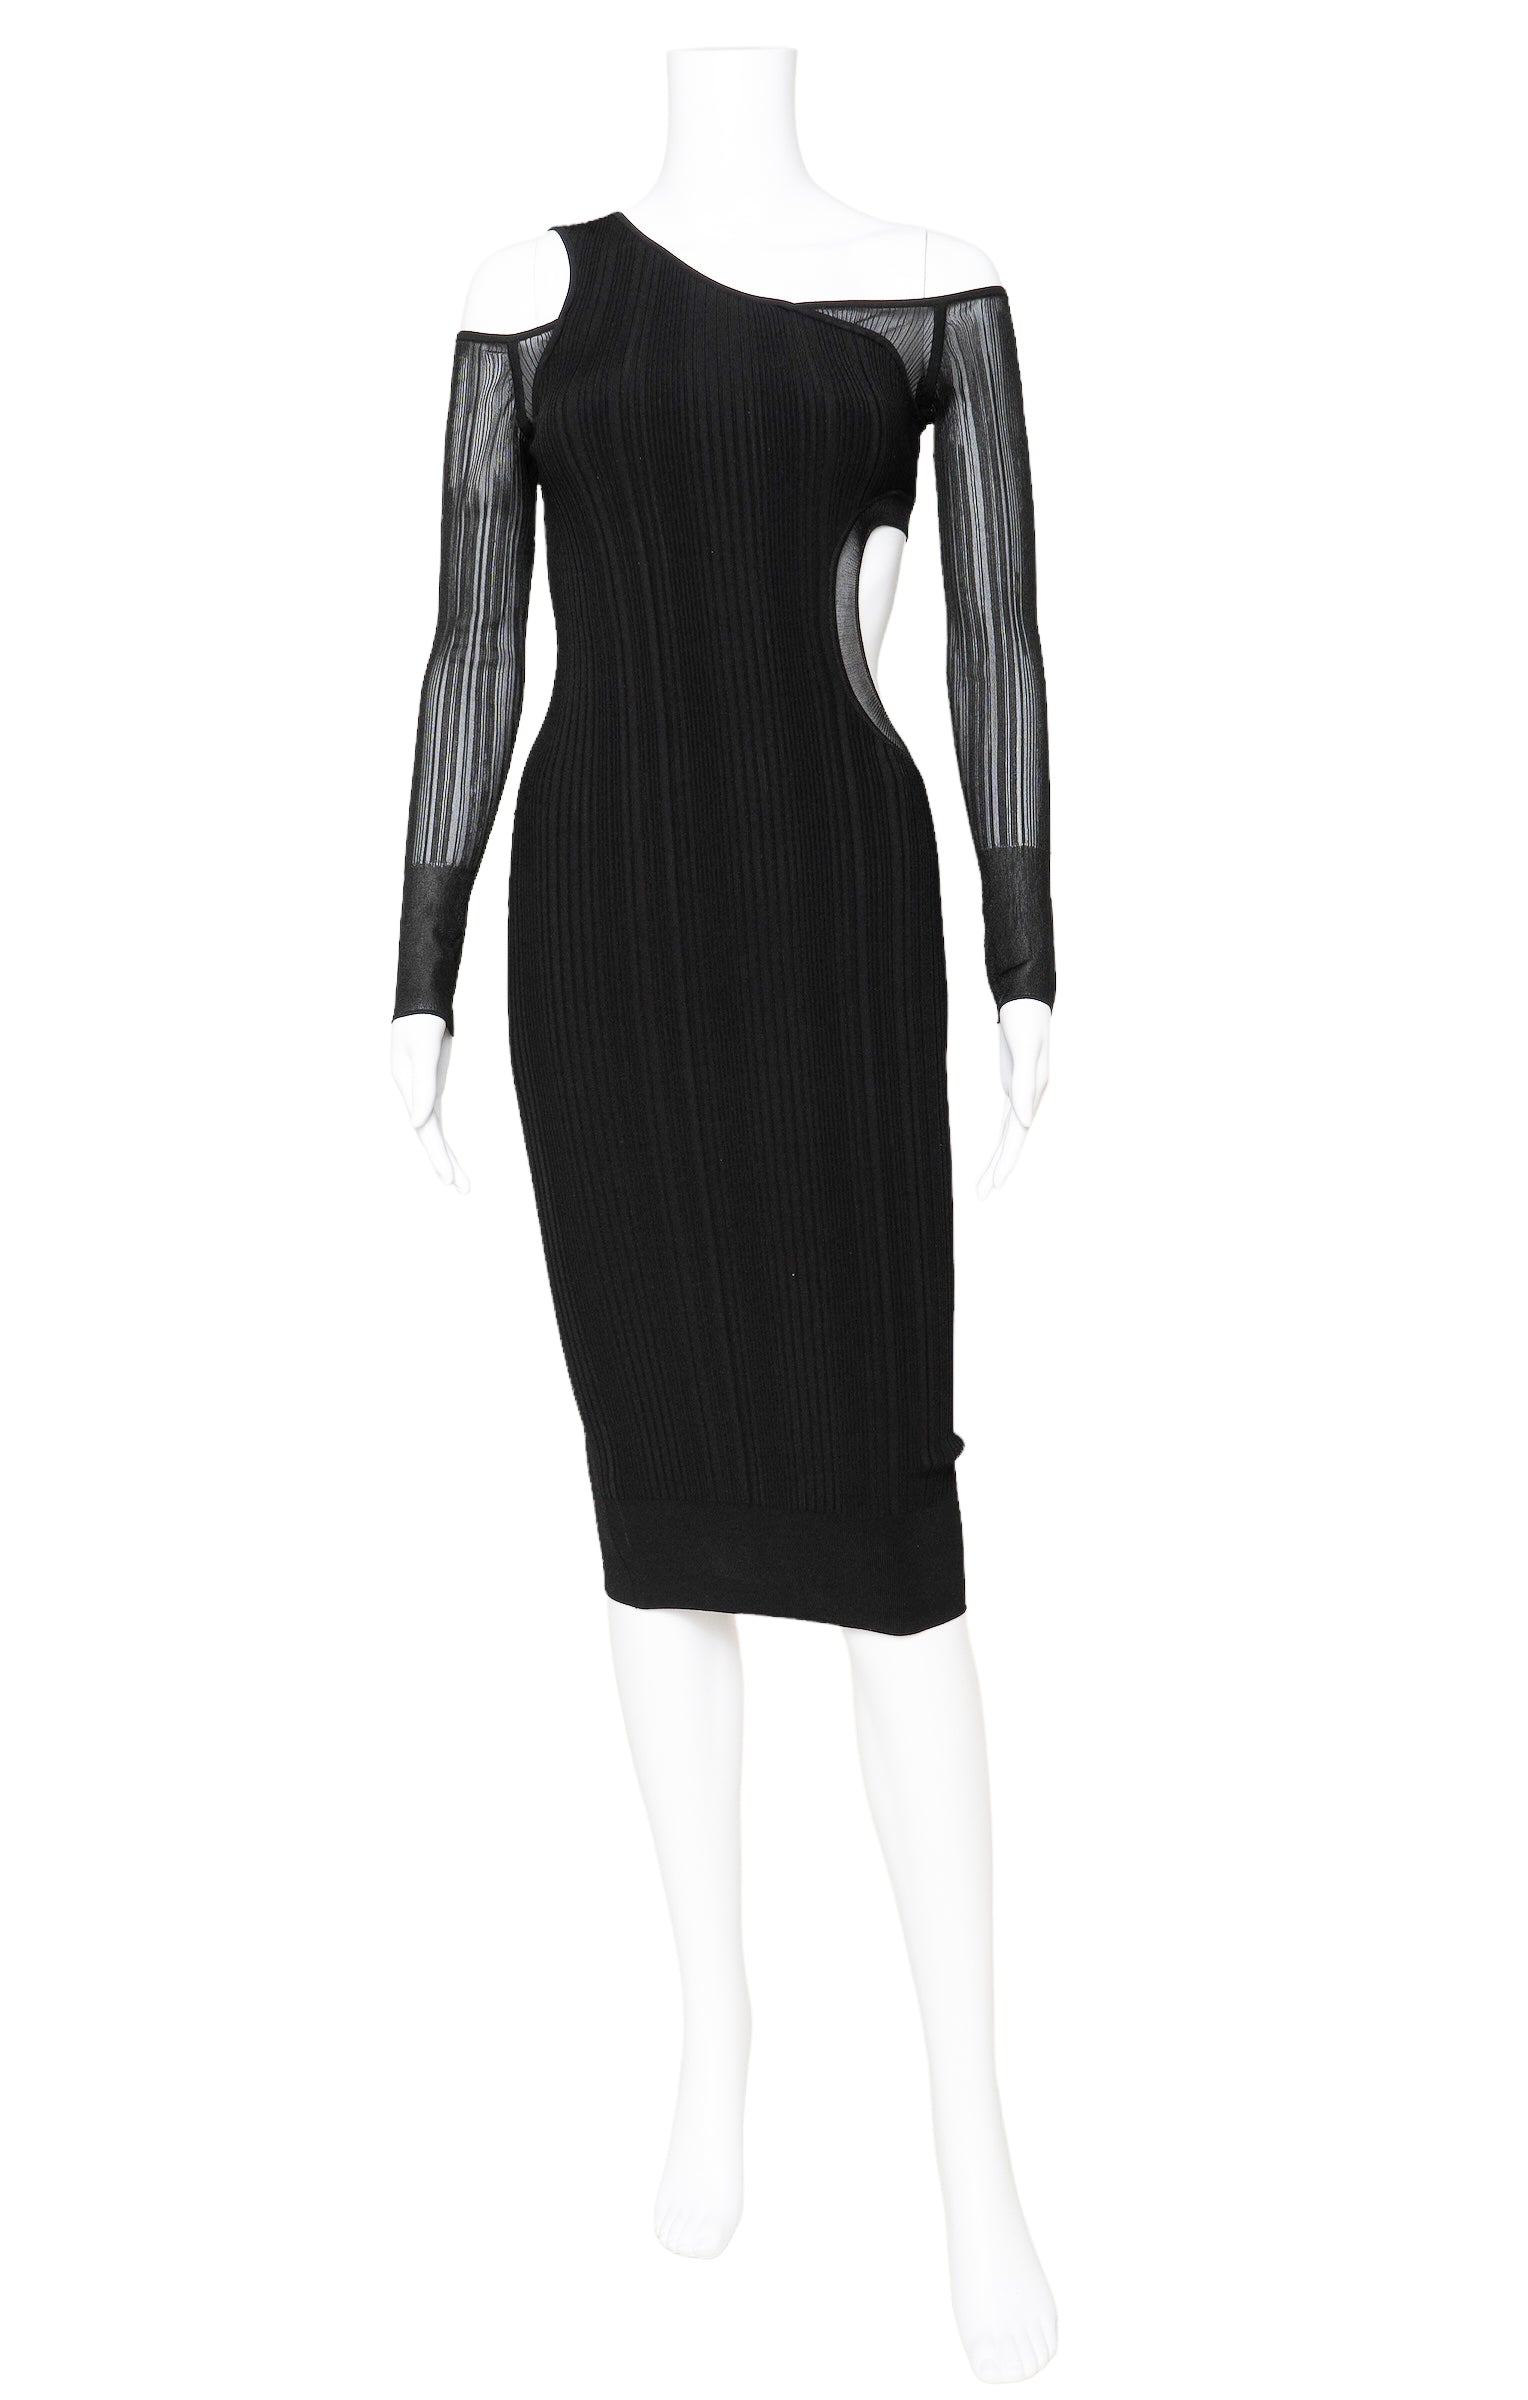 HERVE LEGER x LAW ROACH (NEW) with tags Dress Size: S